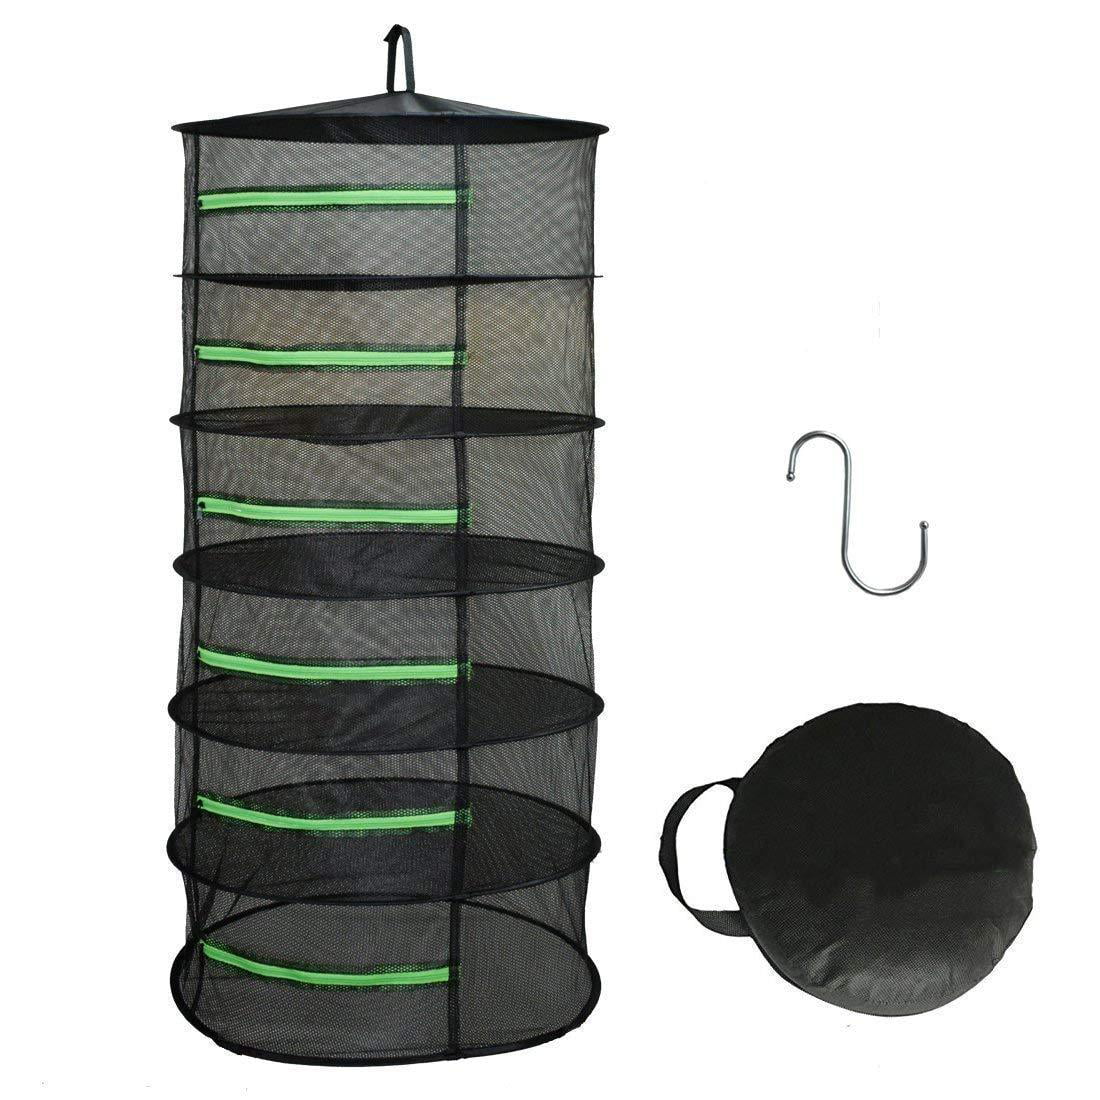 Details about   HYDGOOHO Herb Drying Rack Net Dryer 6 Layer 2ft Black W/Green Zippers Hydropo... 